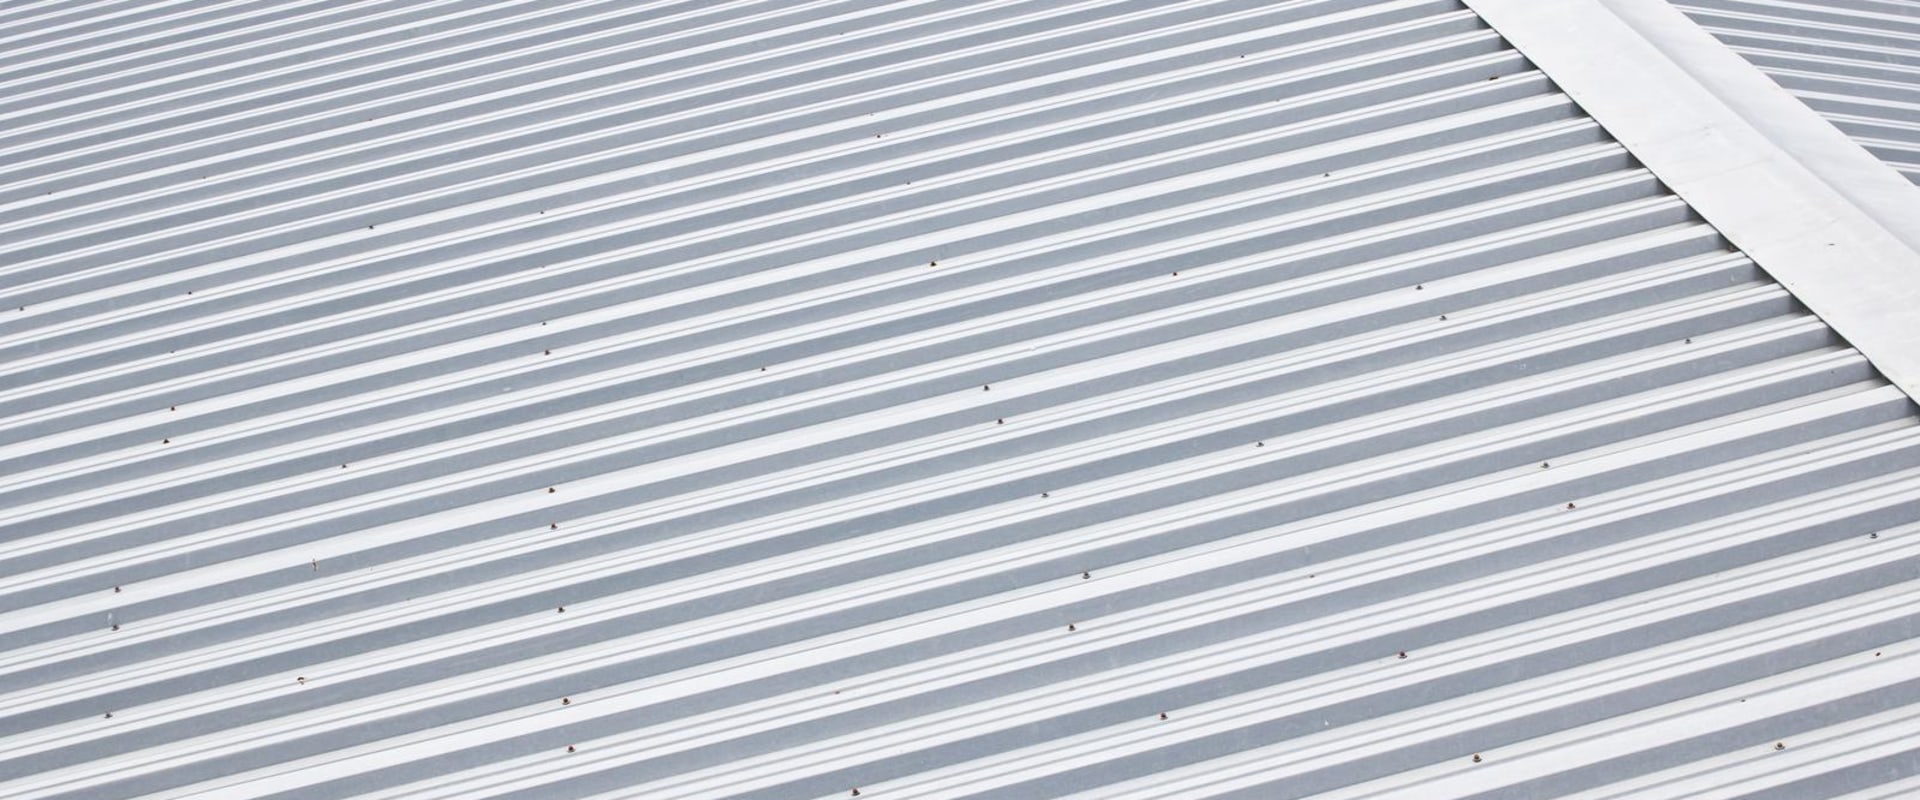 Transform Your Lake Macquarie Home With Stylish And Sustainable Metal Roofing